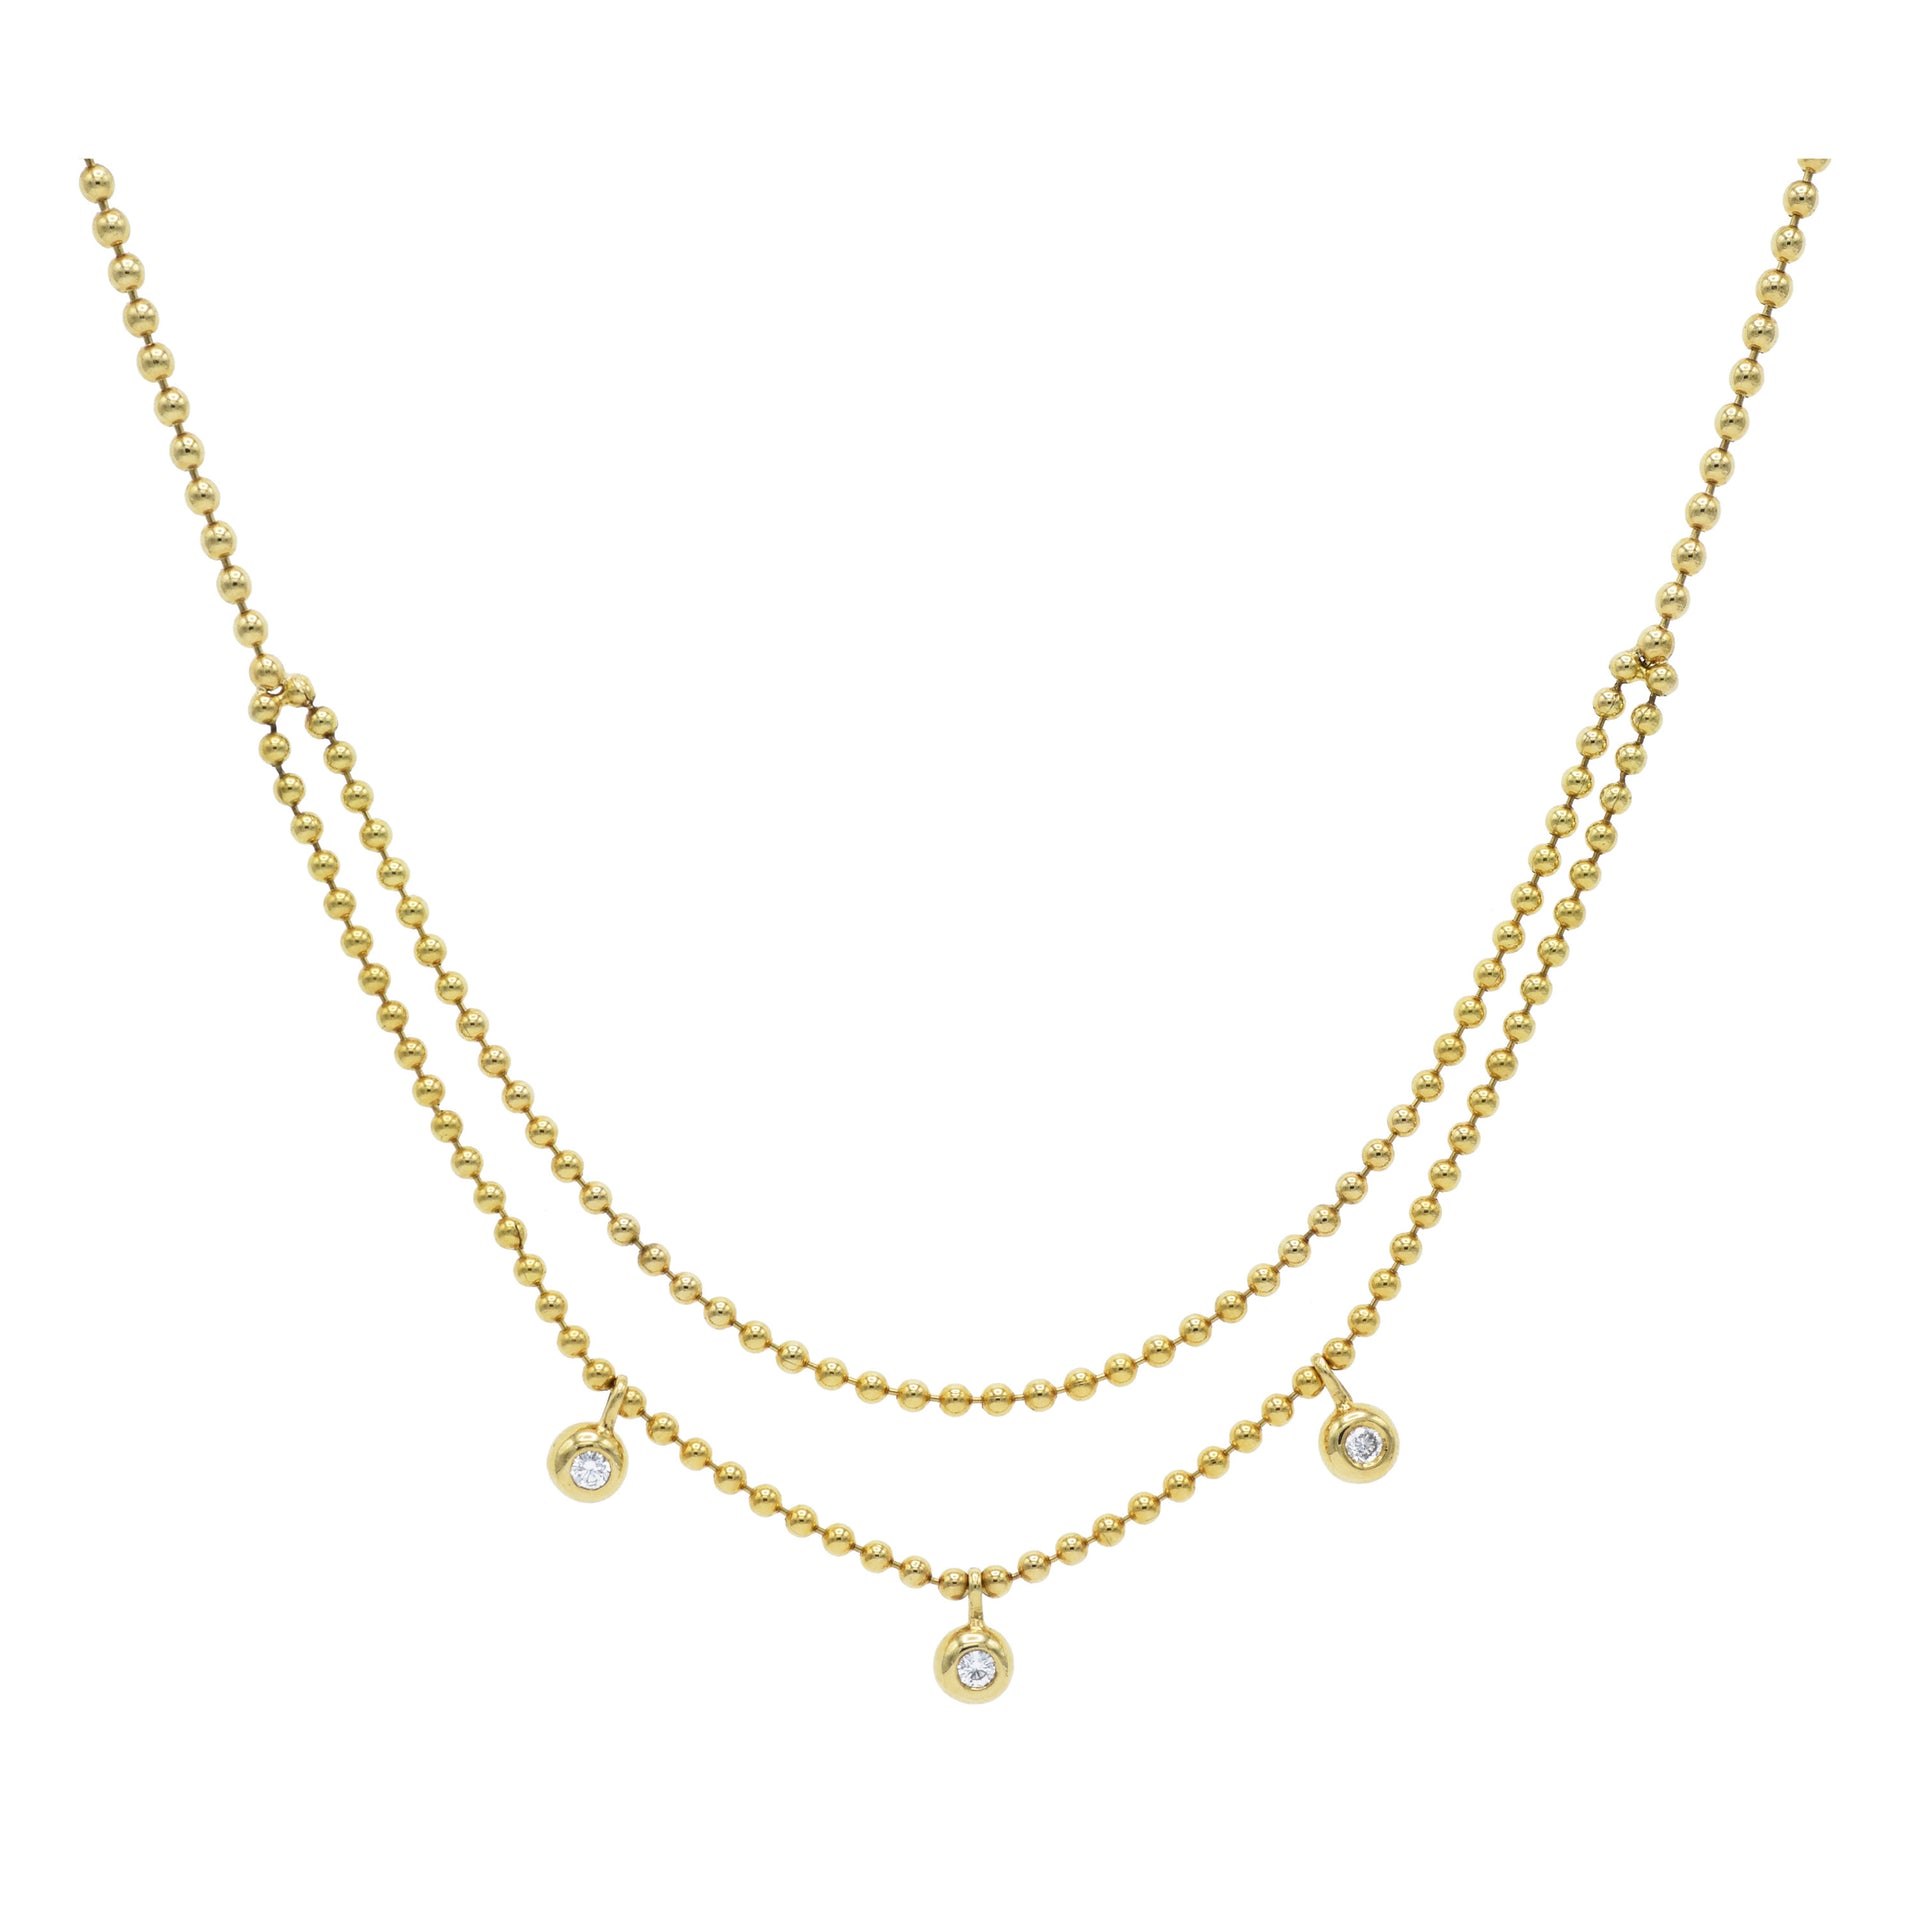 18KT Gold Ball Chain, Double Row Necklace